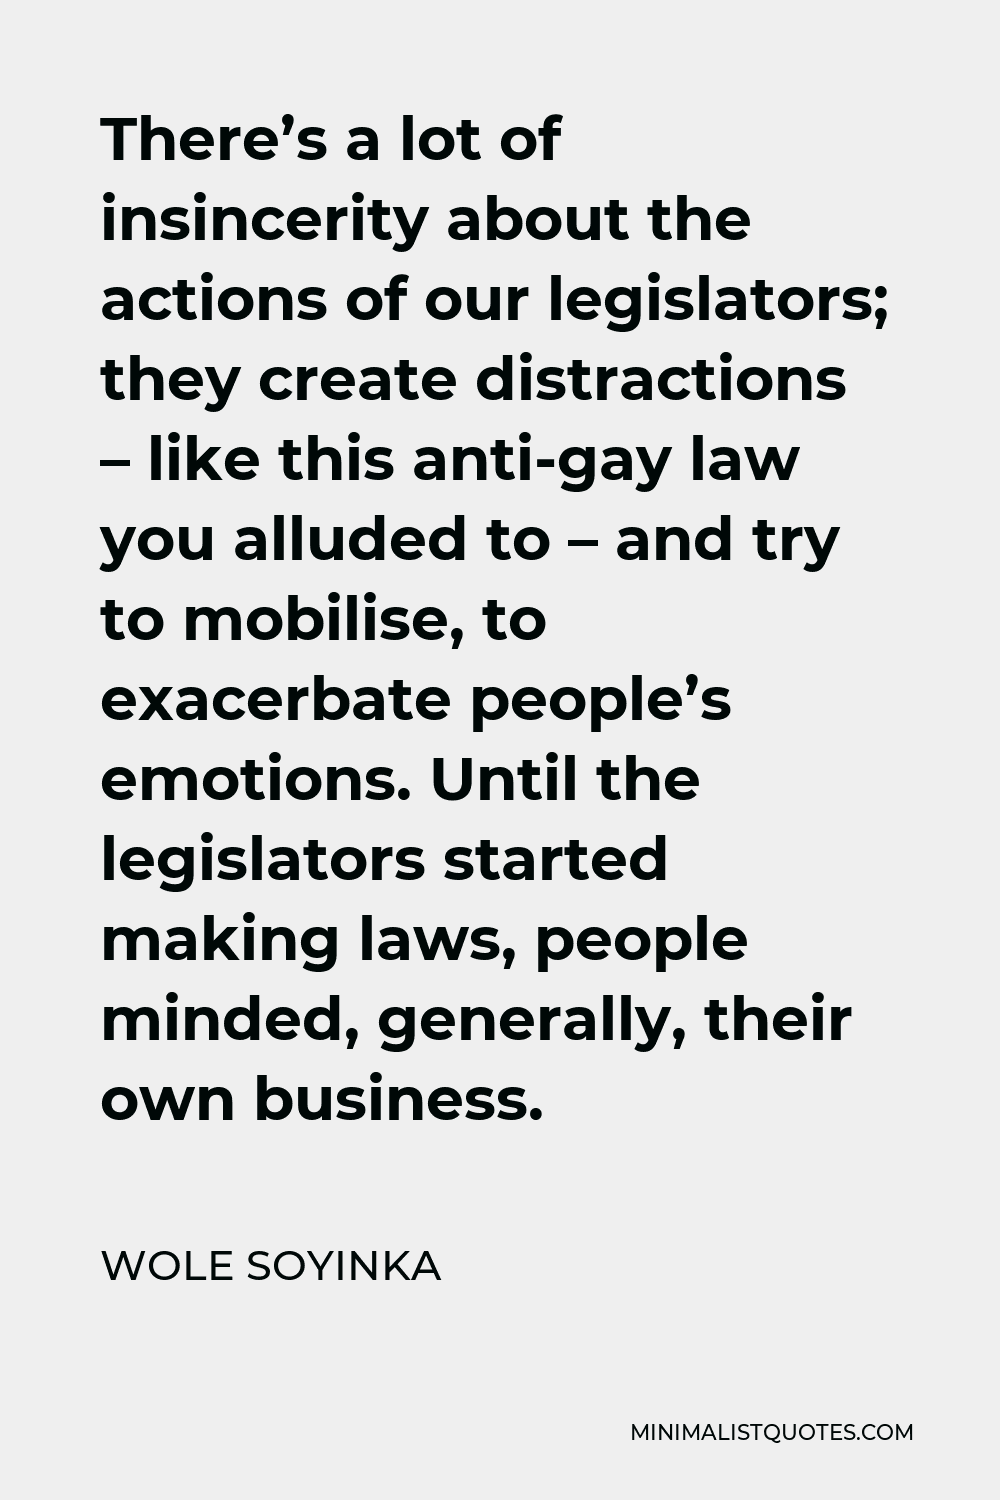 Wole Soyinka Quote - There’s a lot of insincerity about the actions of our legislators; they create distractions – like this anti-gay law you alluded to – and try to mobilise, to exacerbate people’s emotions. Until the legislators started making laws, people minded, generally, their own business.